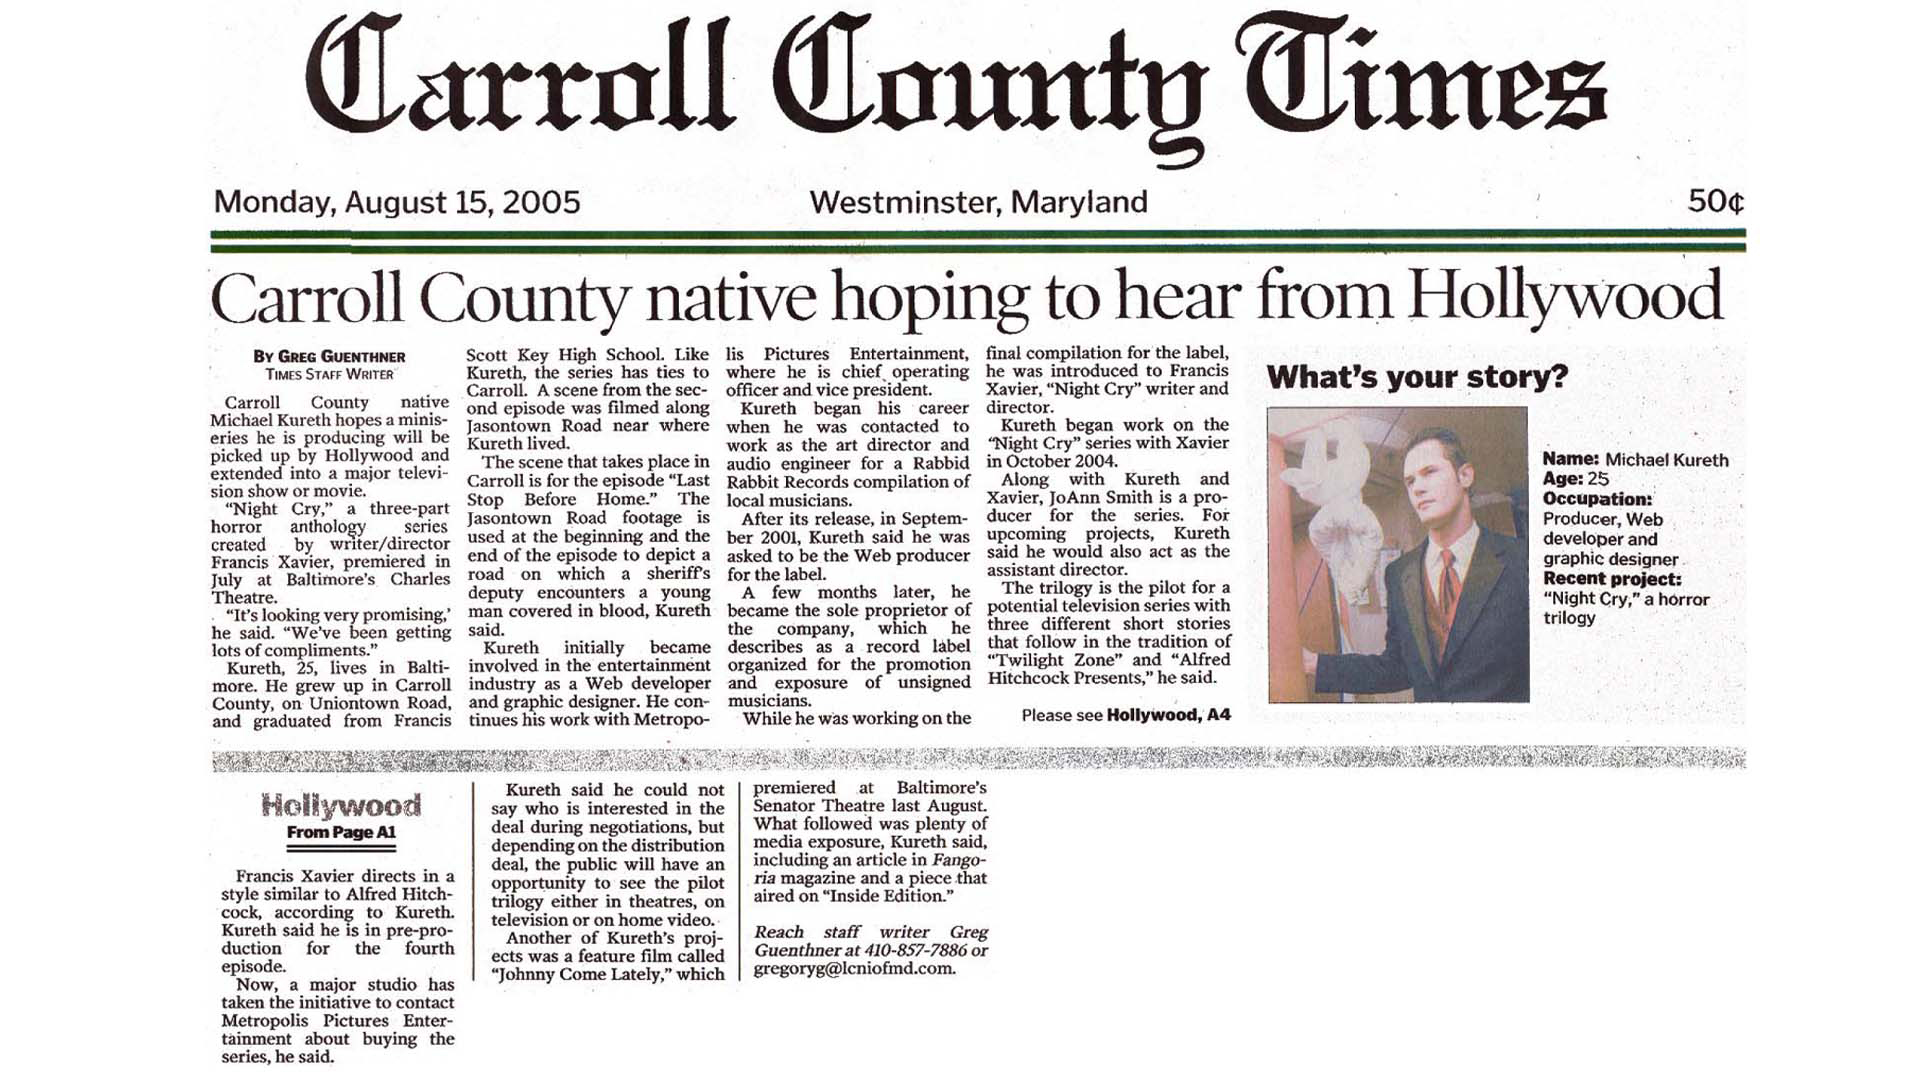 Carroll County Times interview with Michael Kureth